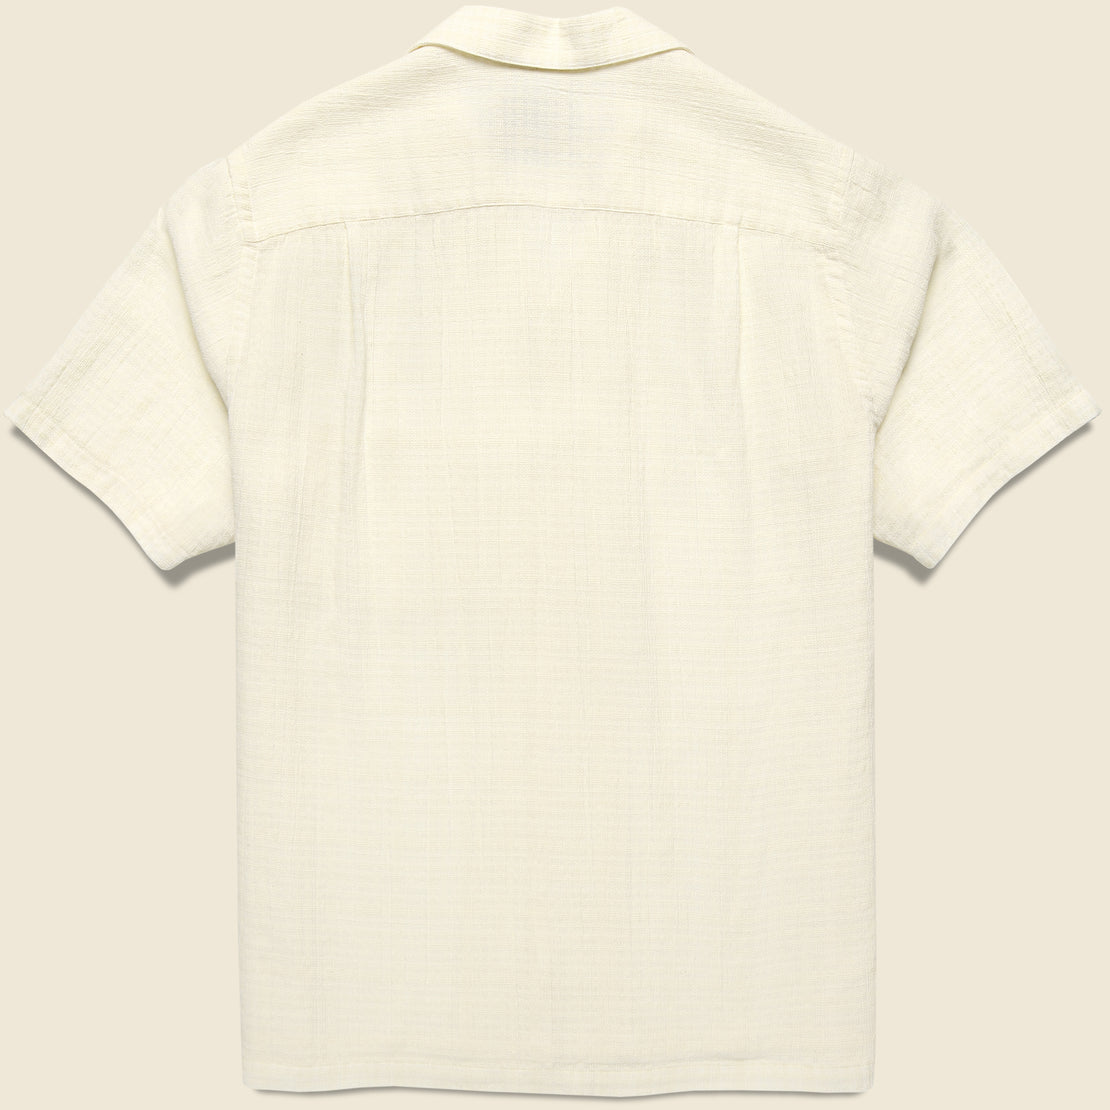 Grain Camp Shirt - White - Portuguese Flannel - STAG Provisions - Tops - S/S Woven - Solid